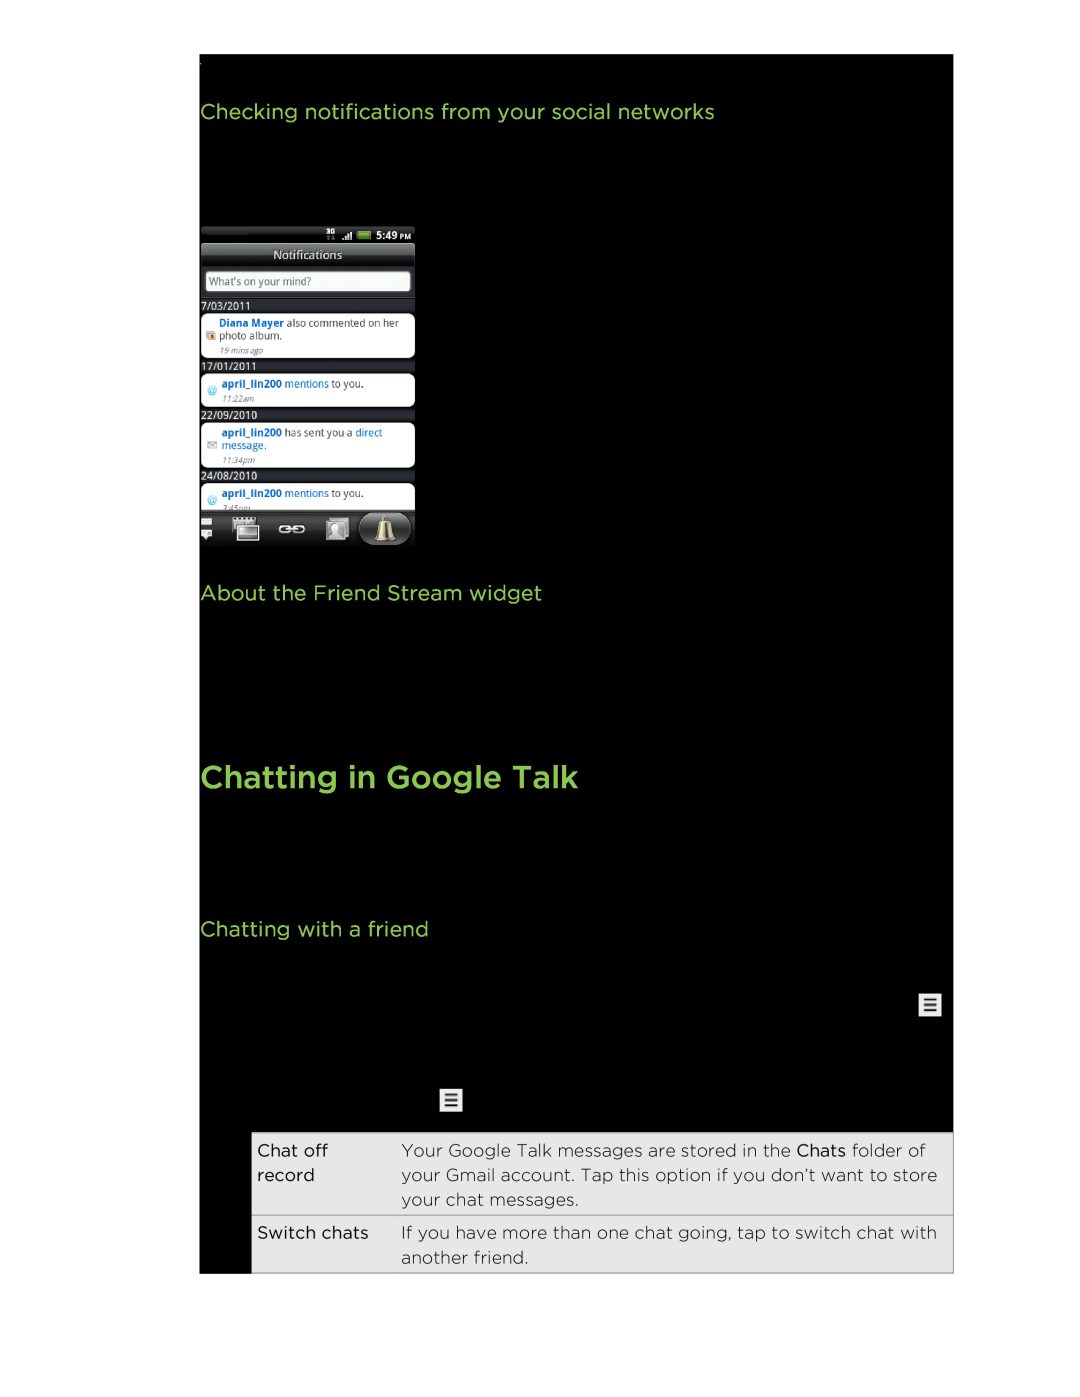 HTC manual Chatting in Google Talk, Checking notifications from your social networks, About the Friend Stream widget 